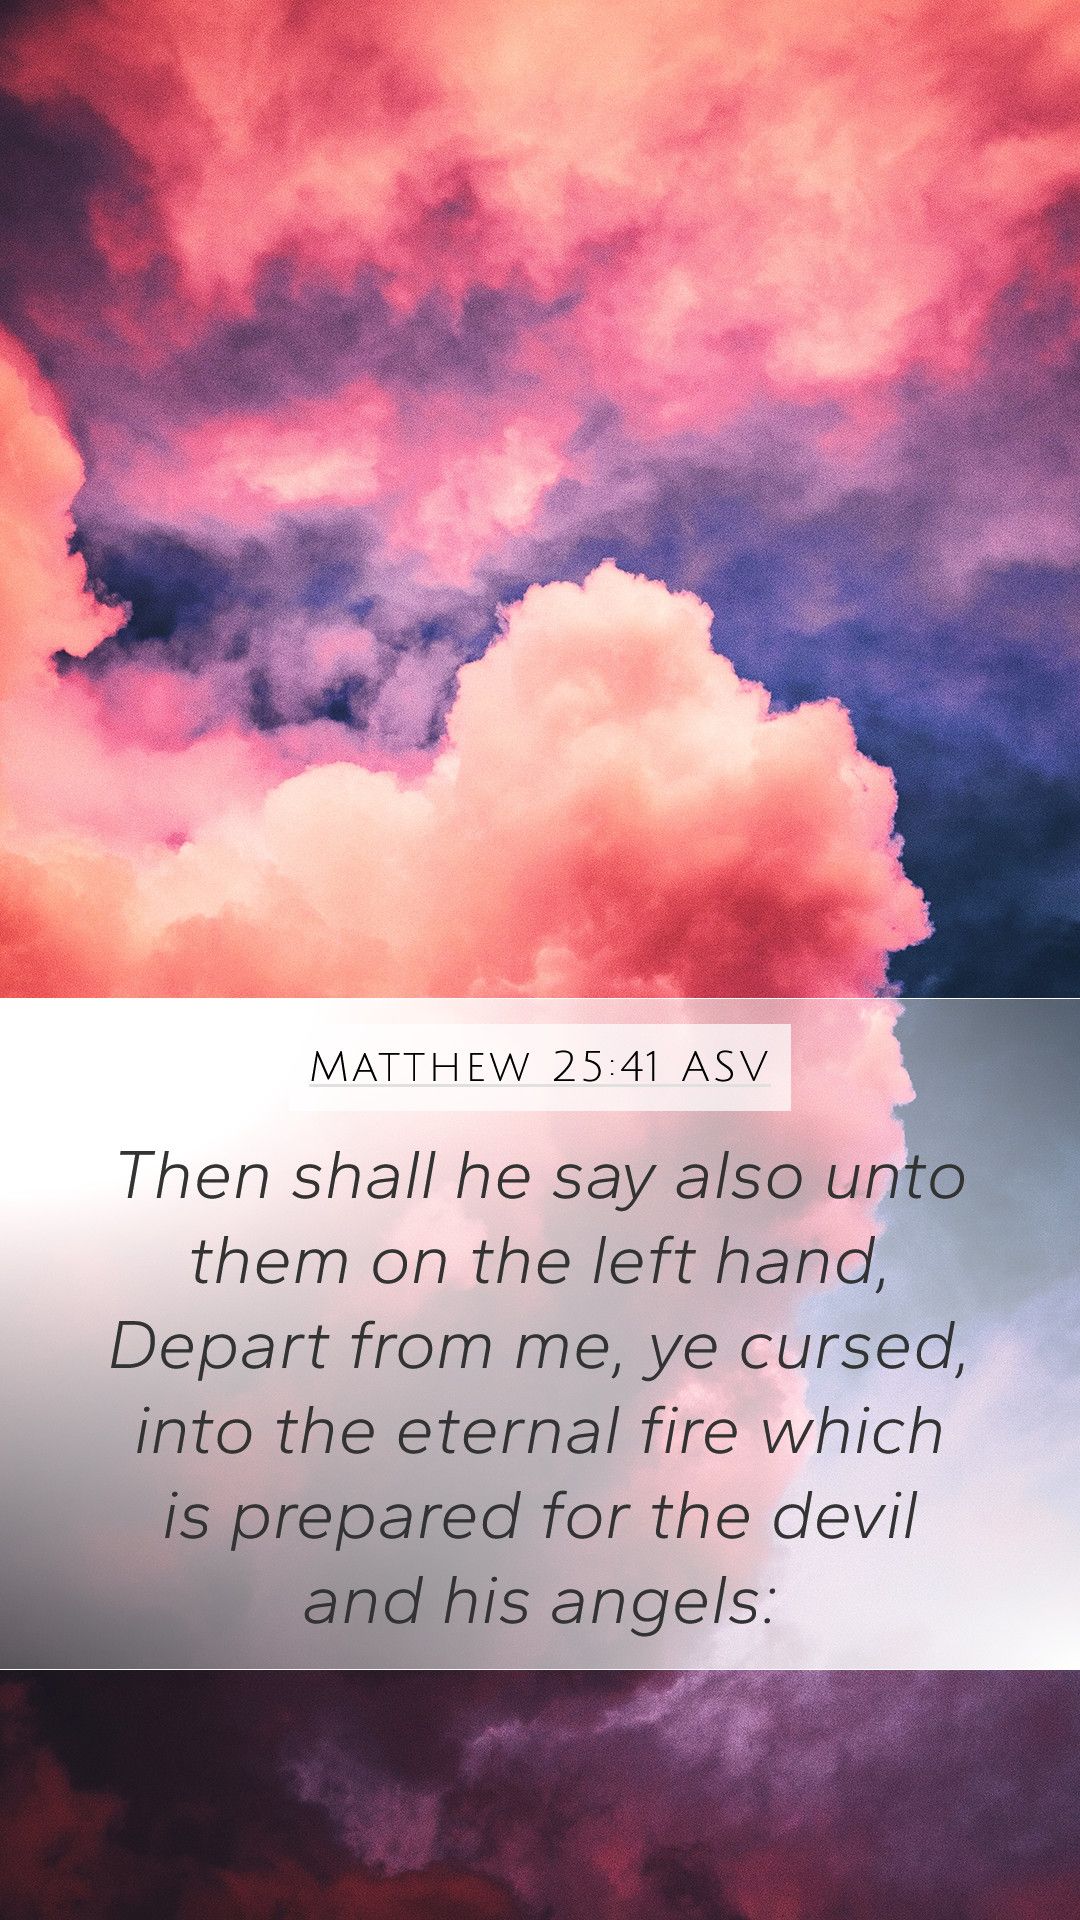 Matthew 25:41 ASV Mobile Phone Wallpaper shall he say also unto them on the left